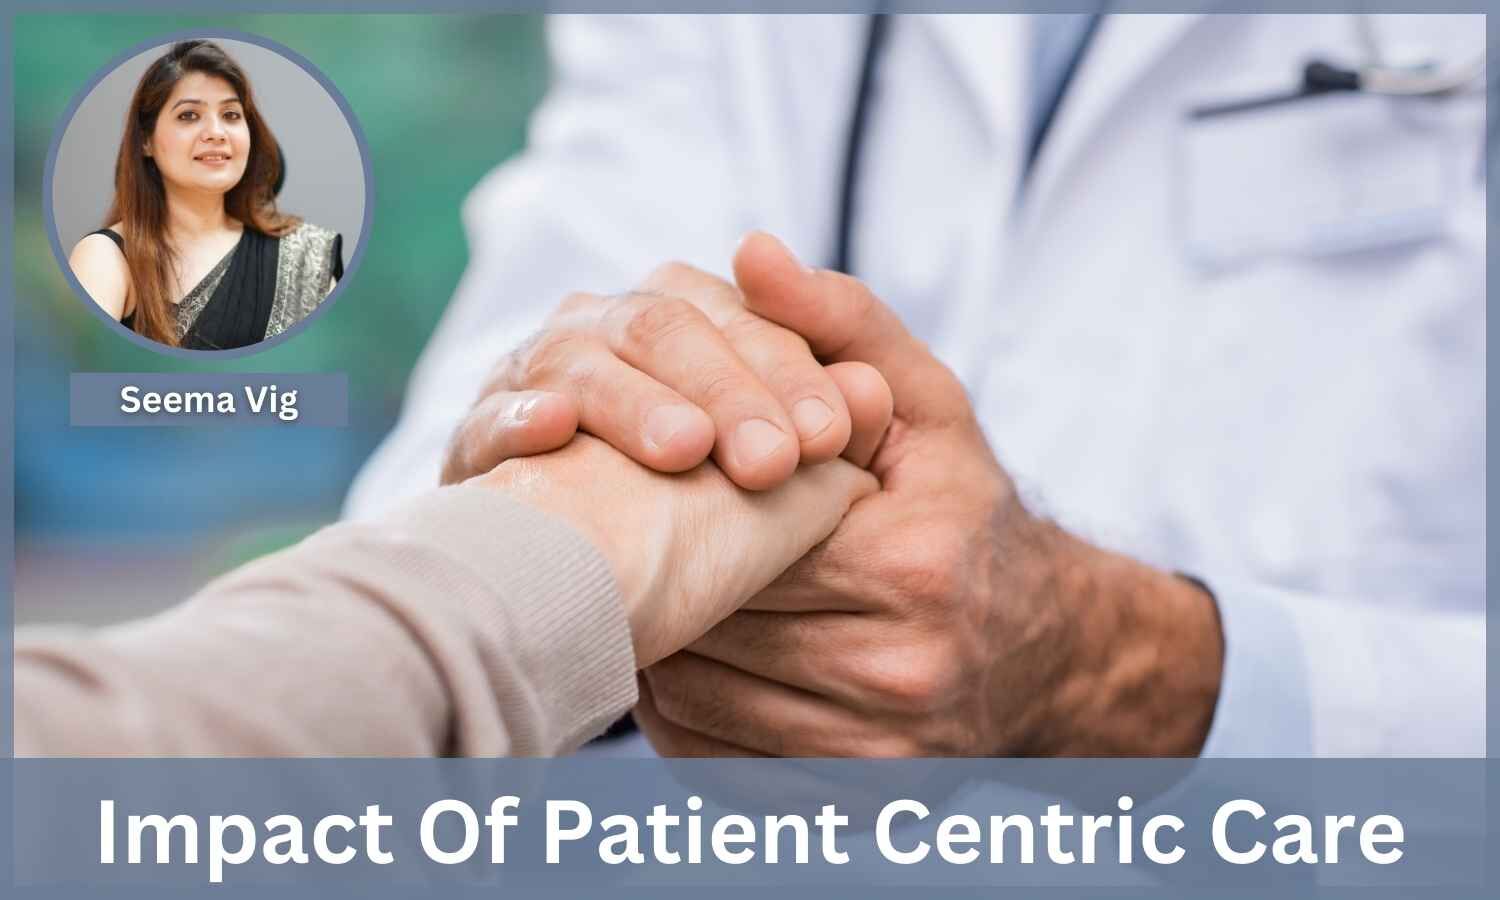 The Impact of Patient-Centric Care on Healthcare Quality